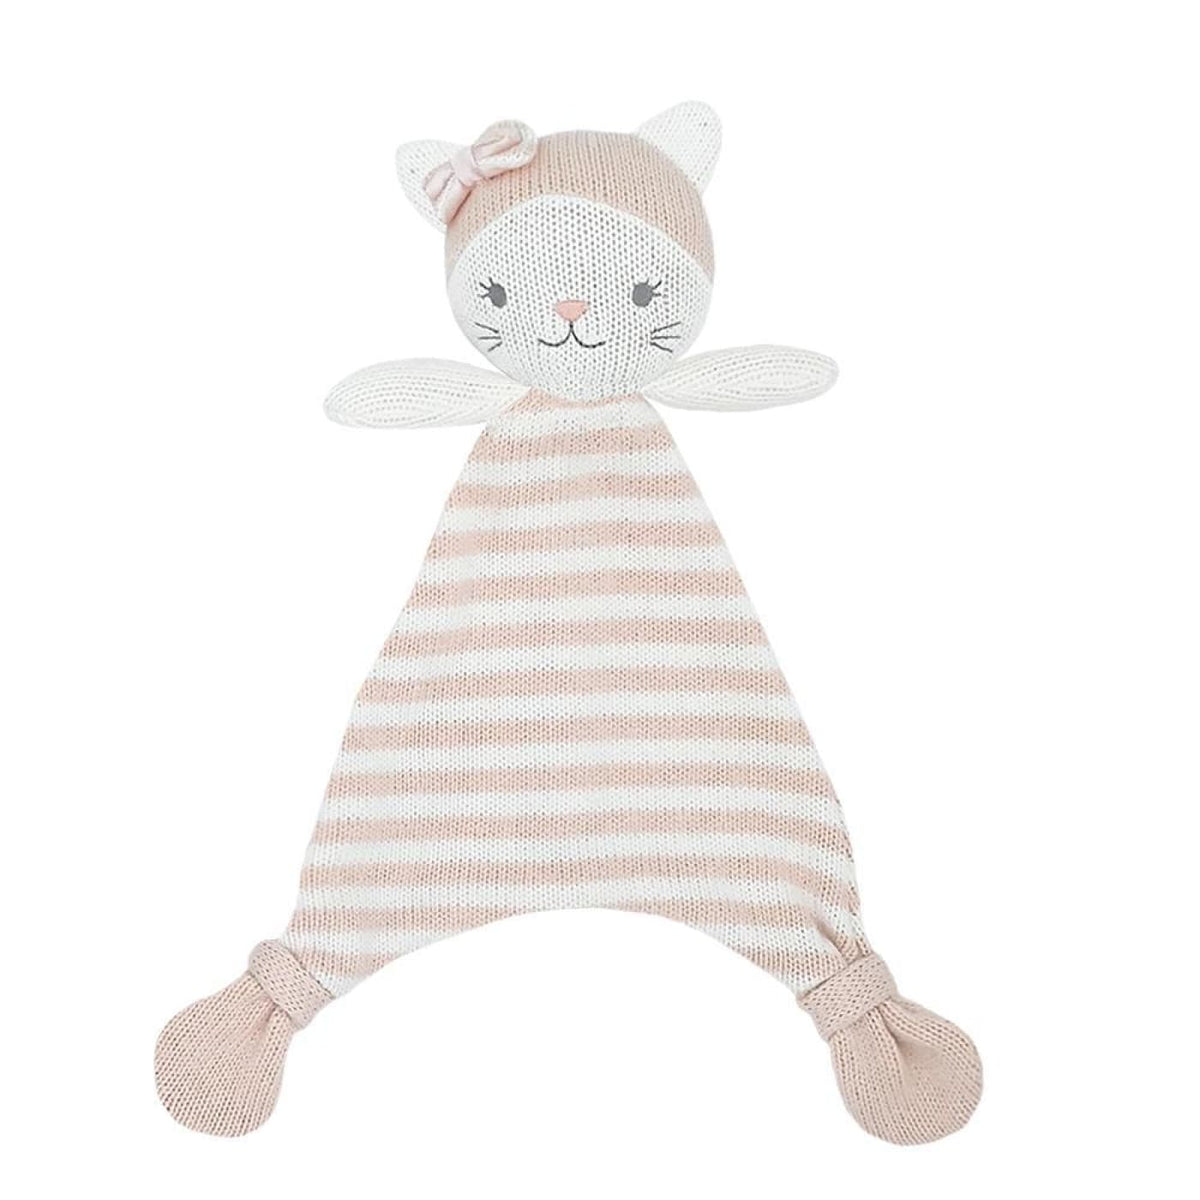 Living Textiles Knit Security Blanket - Daisy The Cat - TOYS &amp; PLAY - BLANKIES/COMFORTERS/RATTLES